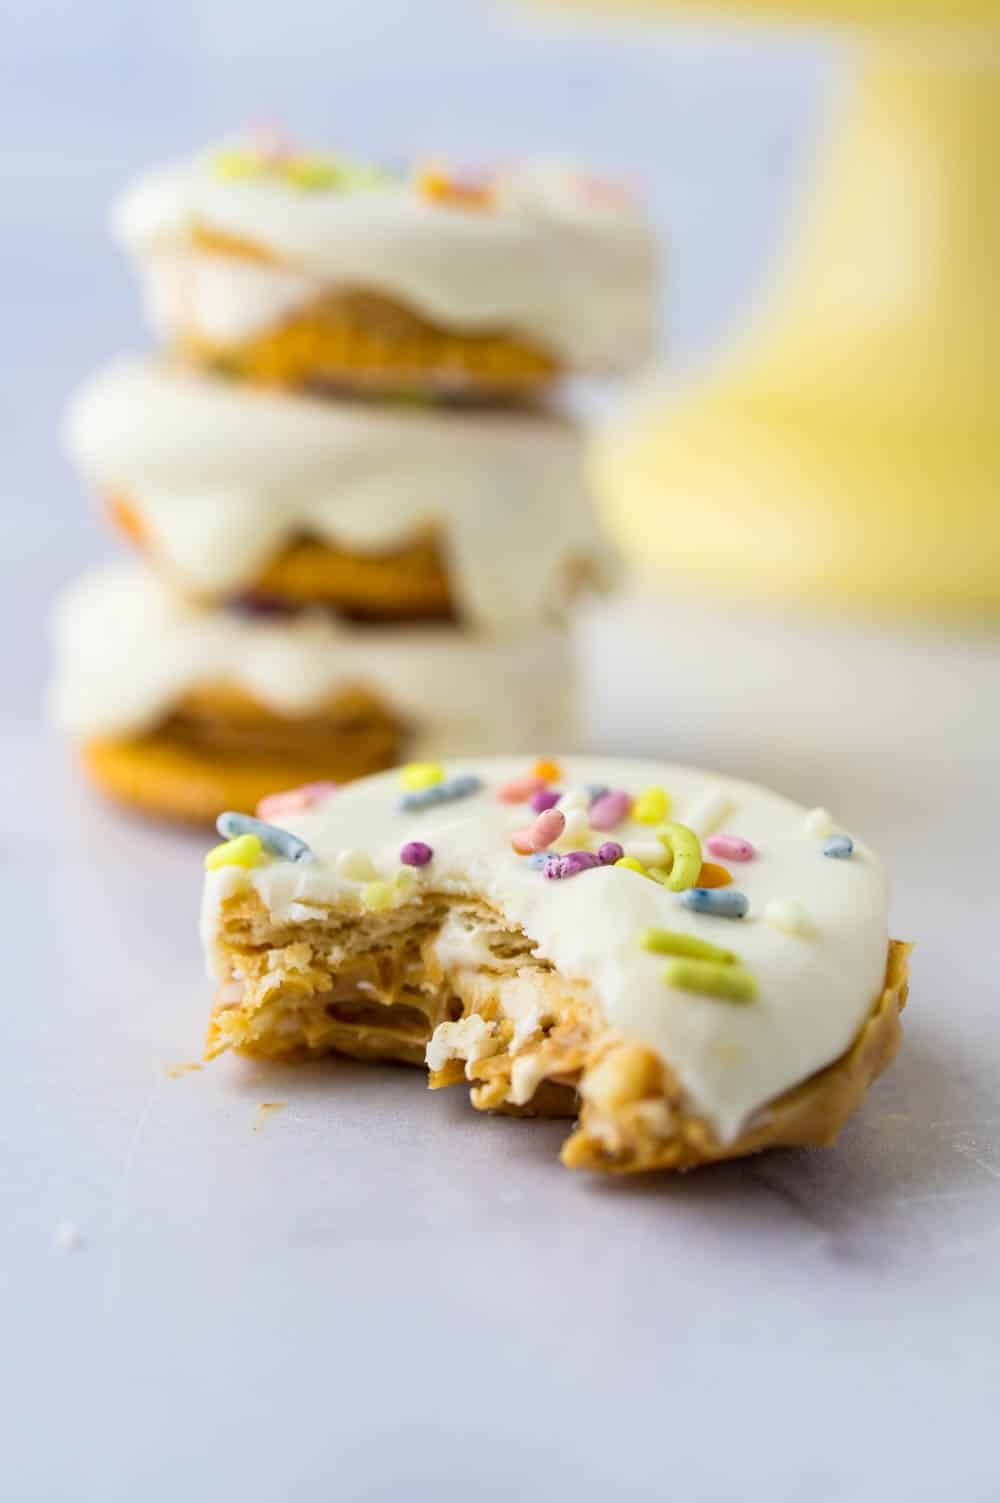 Taking a bite out of the peanut butter marshmallow cookie.